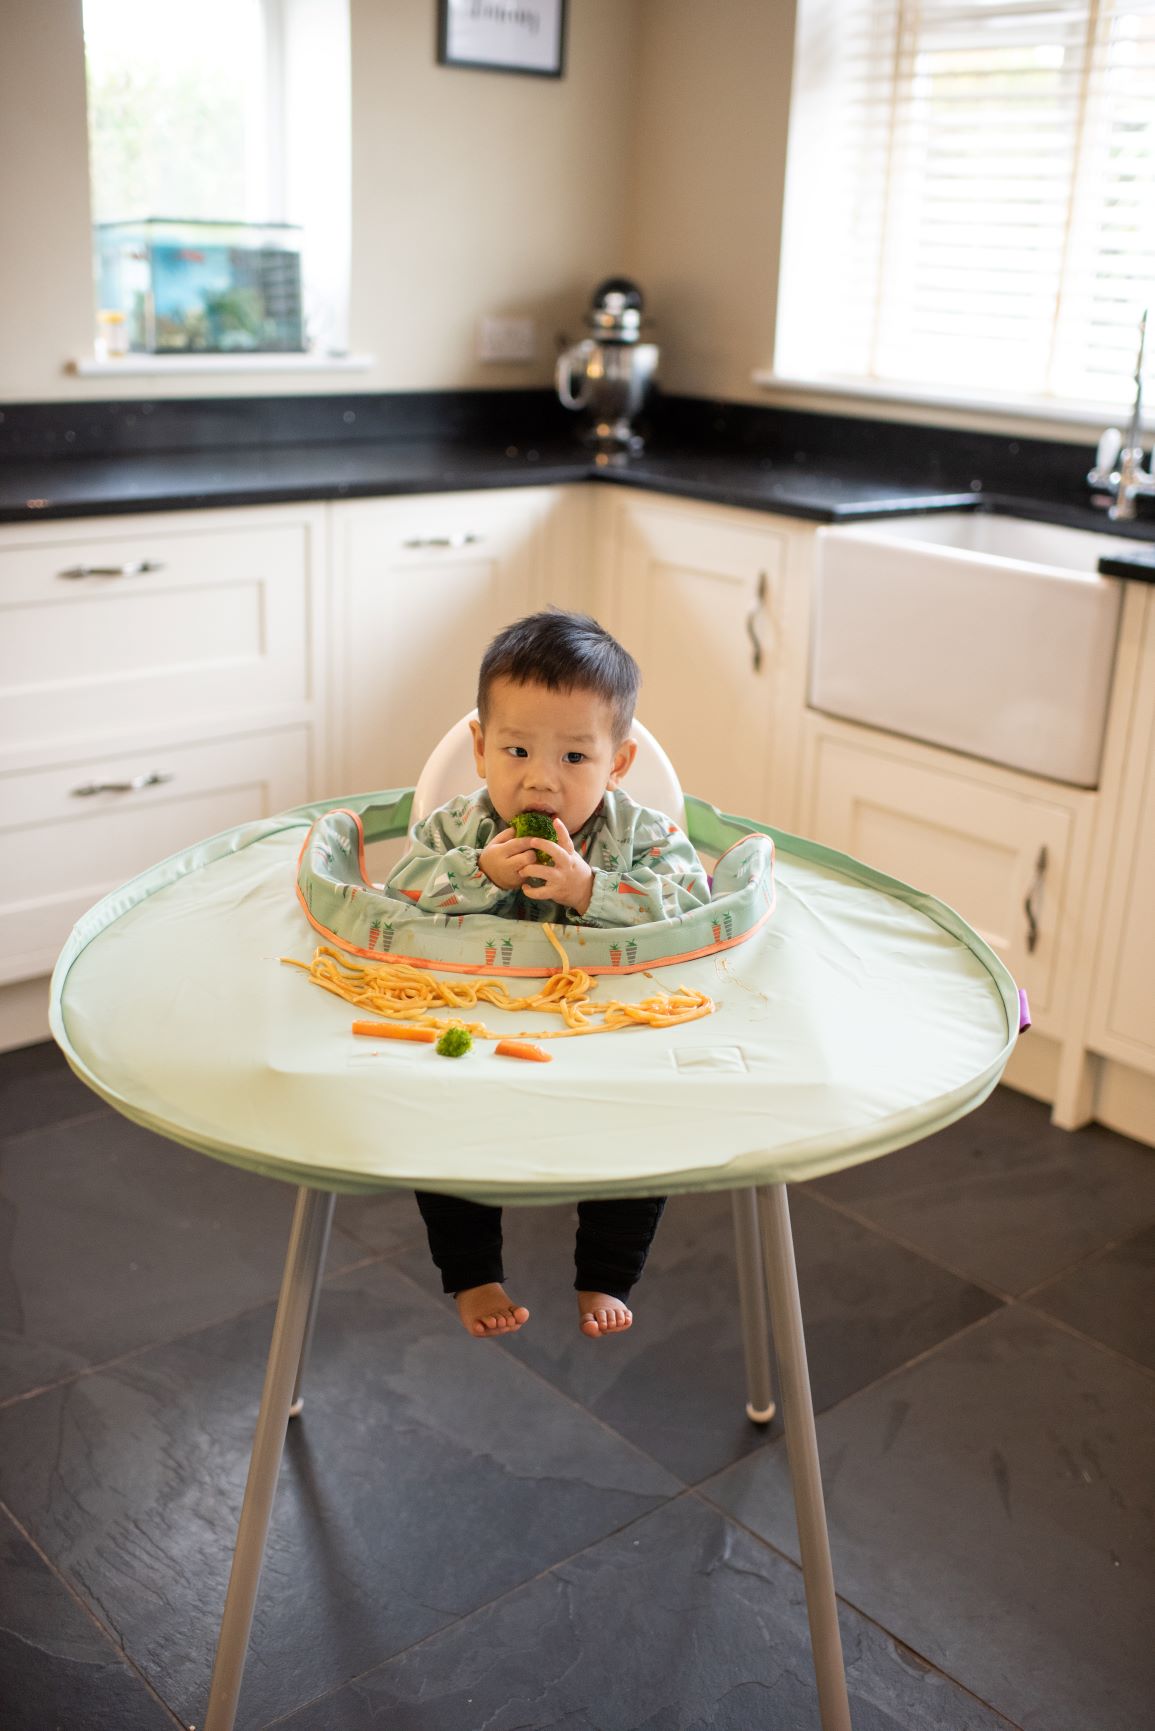 Tidy Tot Bib & Tray Weaning Kit for Baby Led Weaning Feeding Mealtime (6M-2T) 